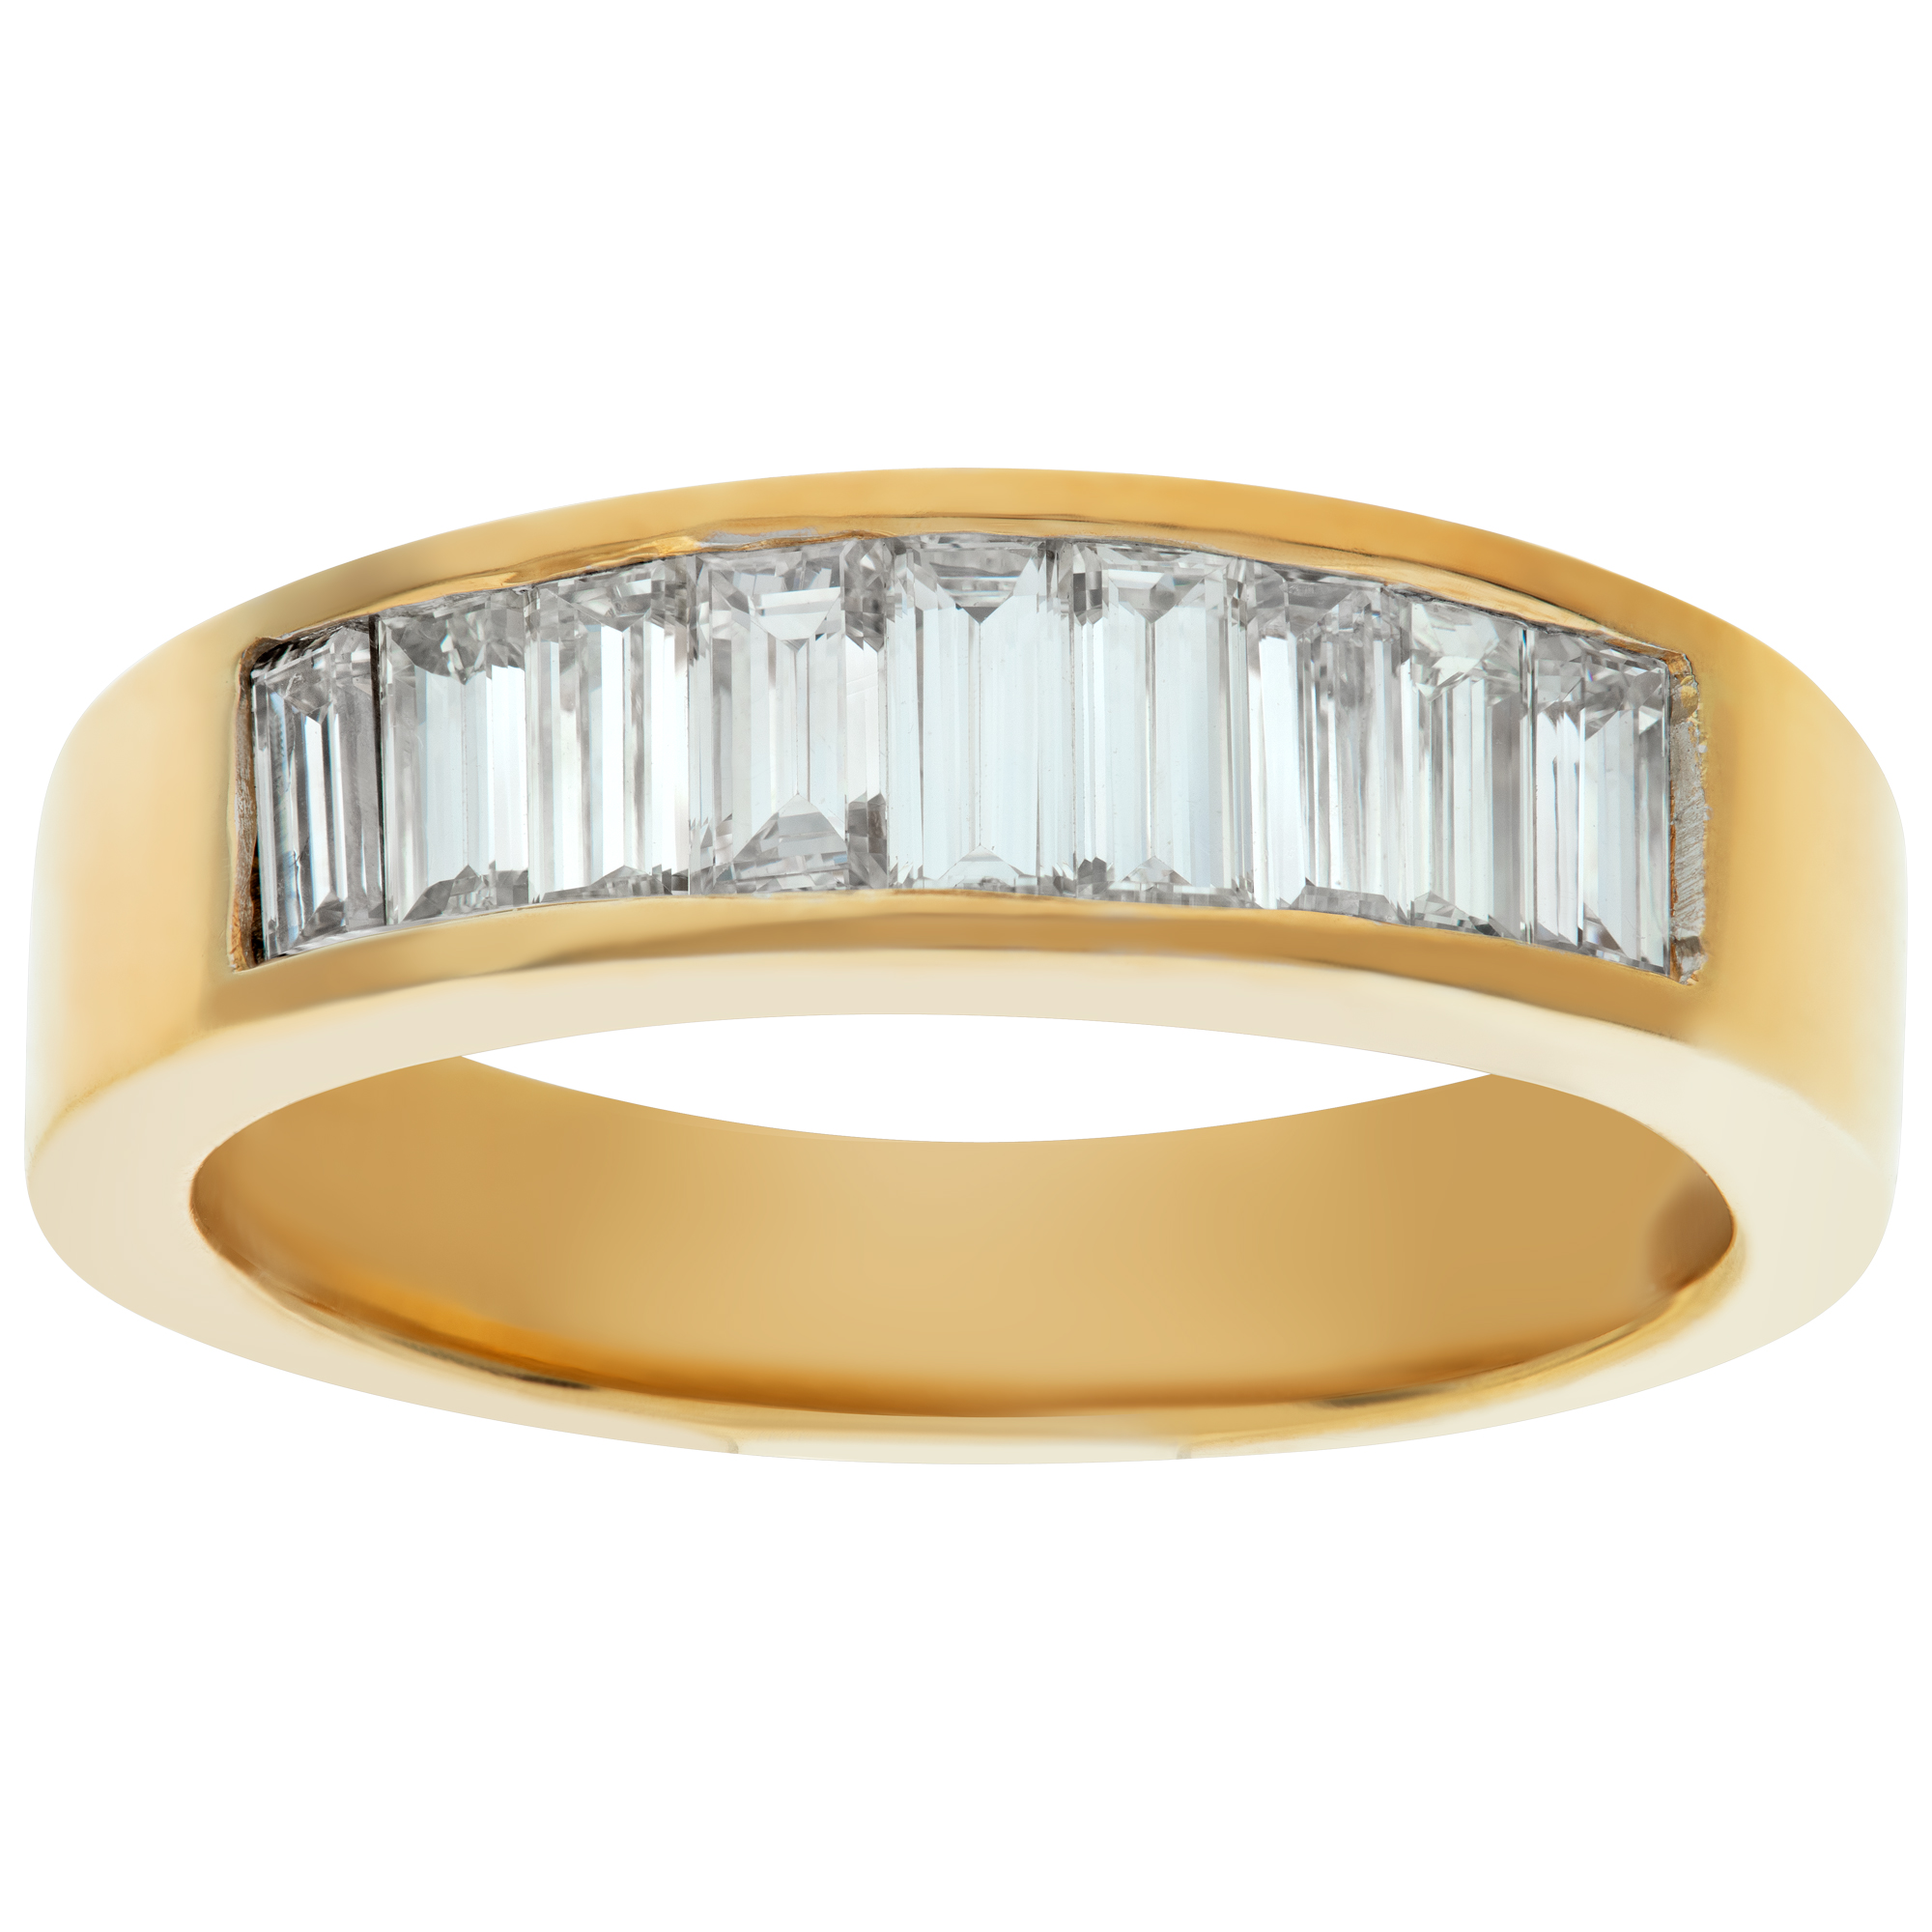 18k Yellow Gold Diamond Wedding Band With Approximately 1.4 Carats